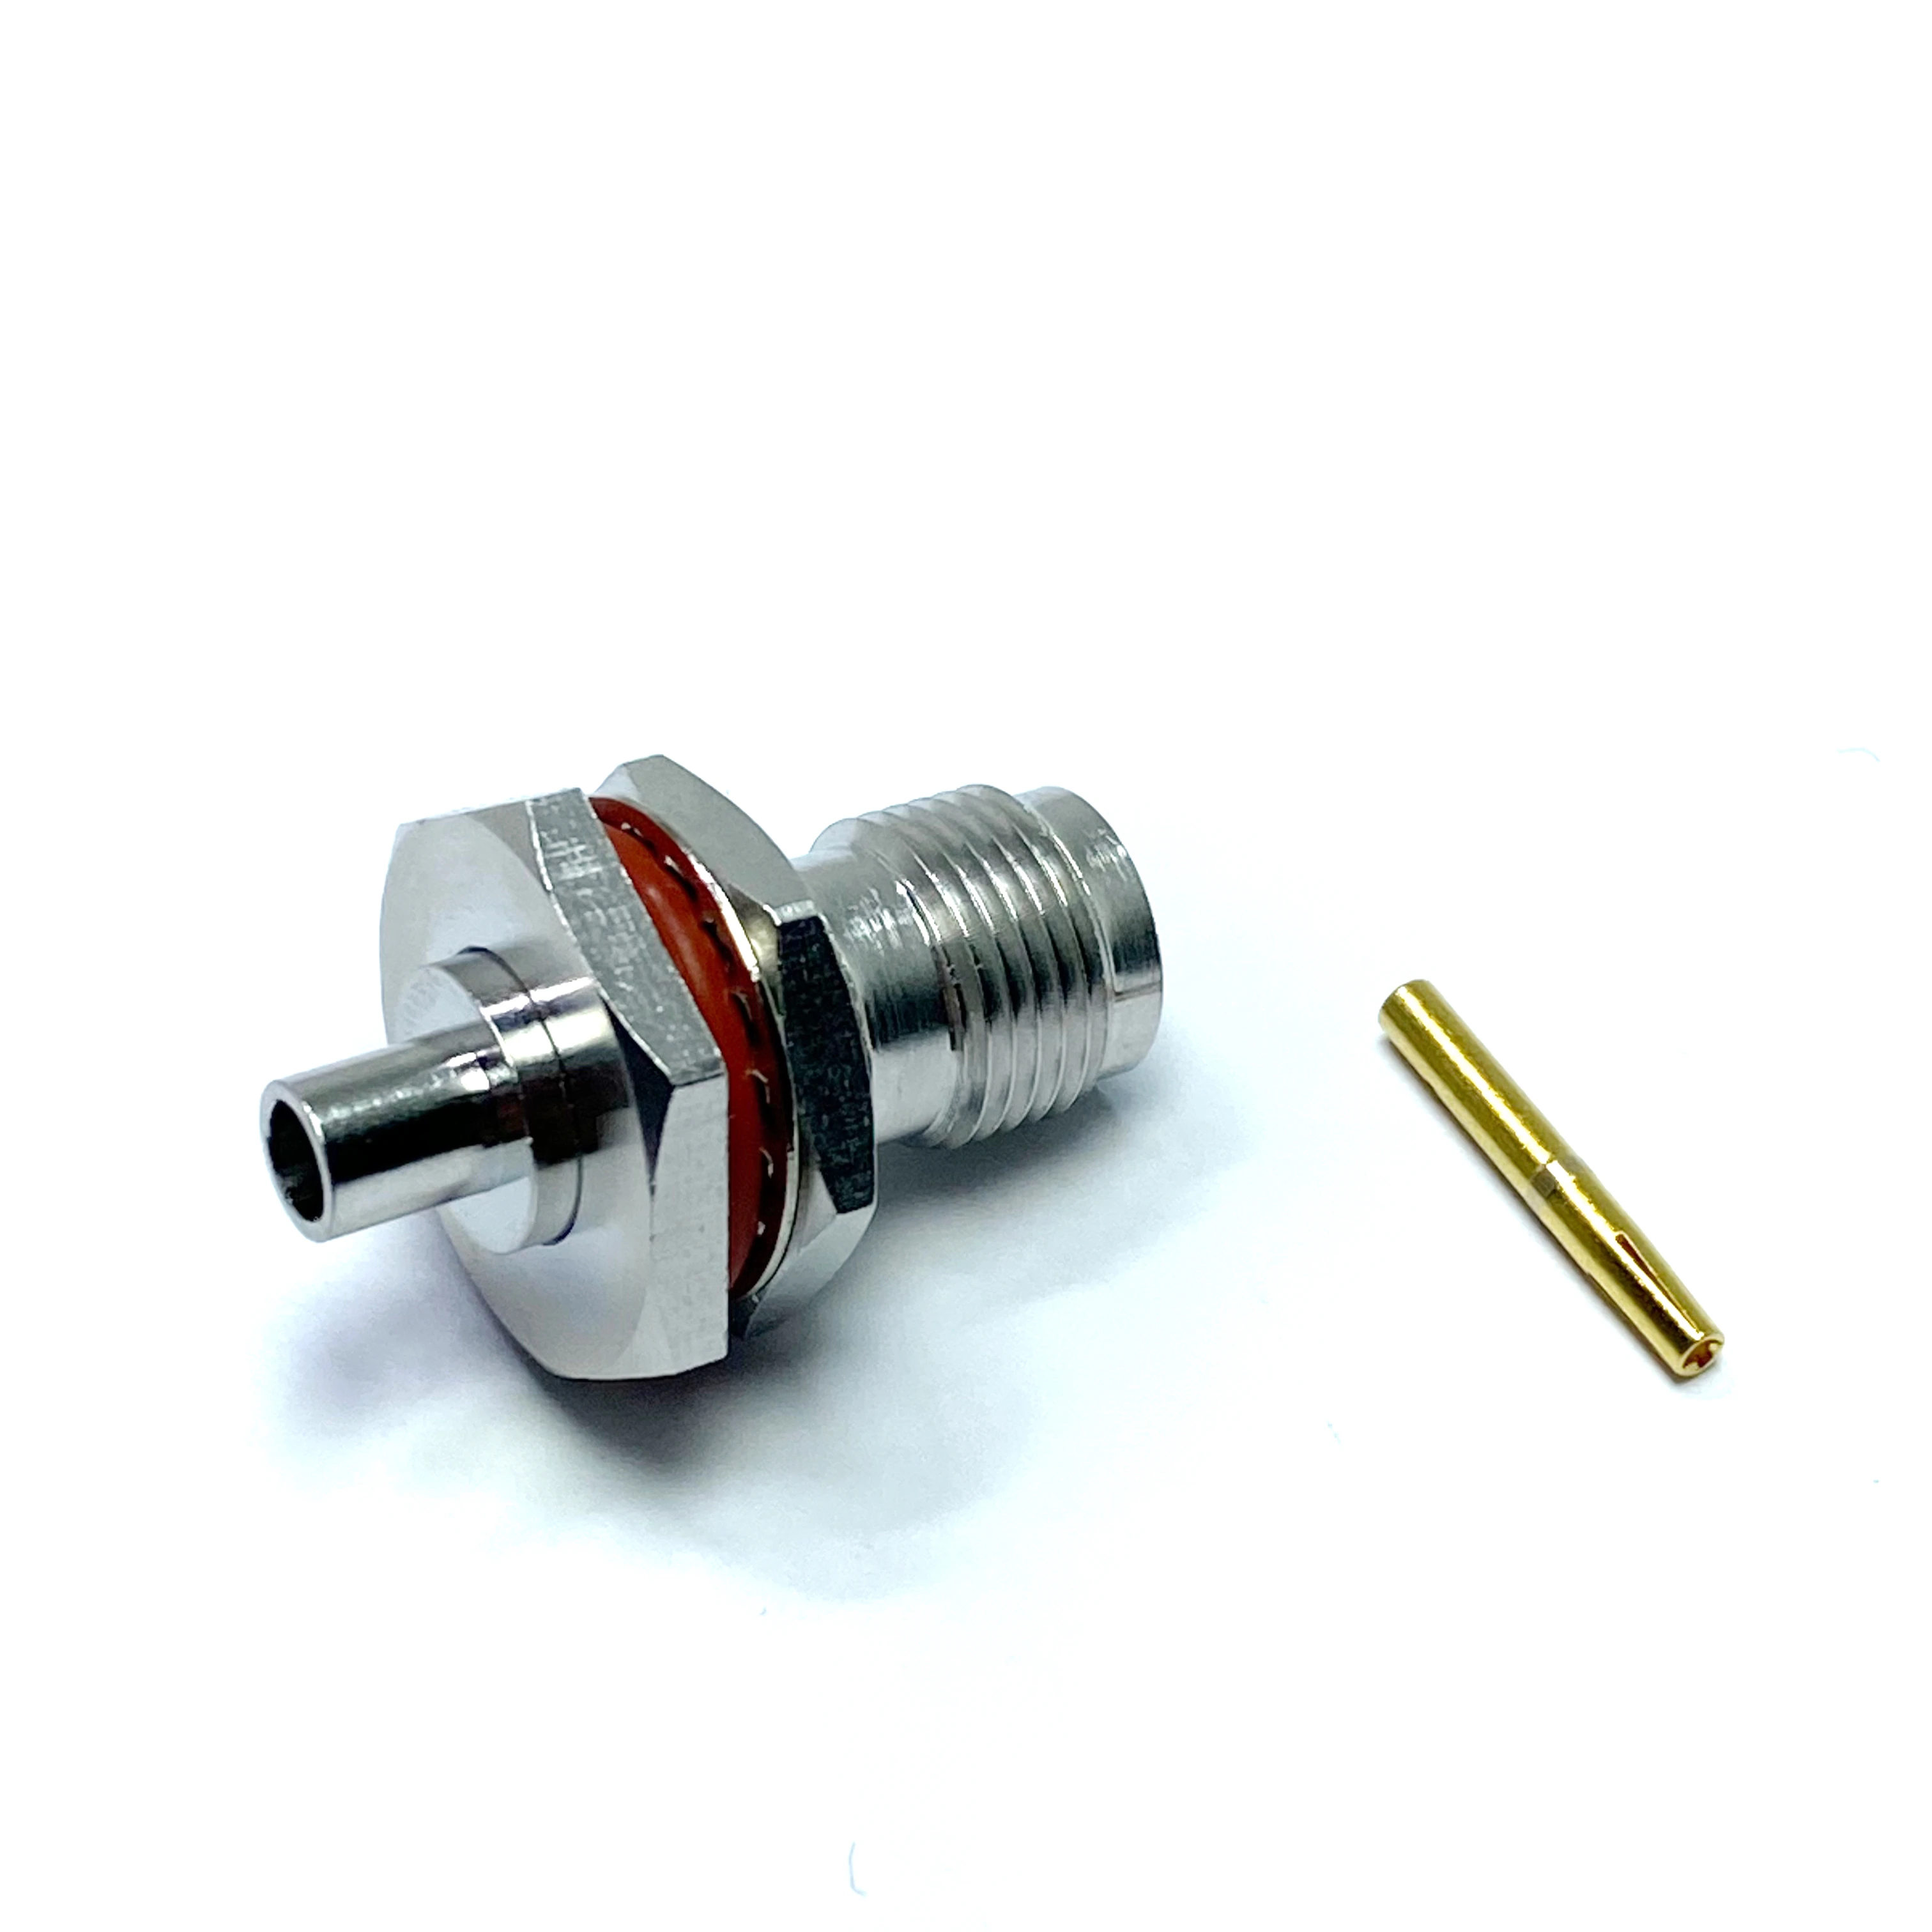 TNC 50ohm waterproof rf coaxial Female Bulkhead High Quality Connector For RG402(.141) Cable details